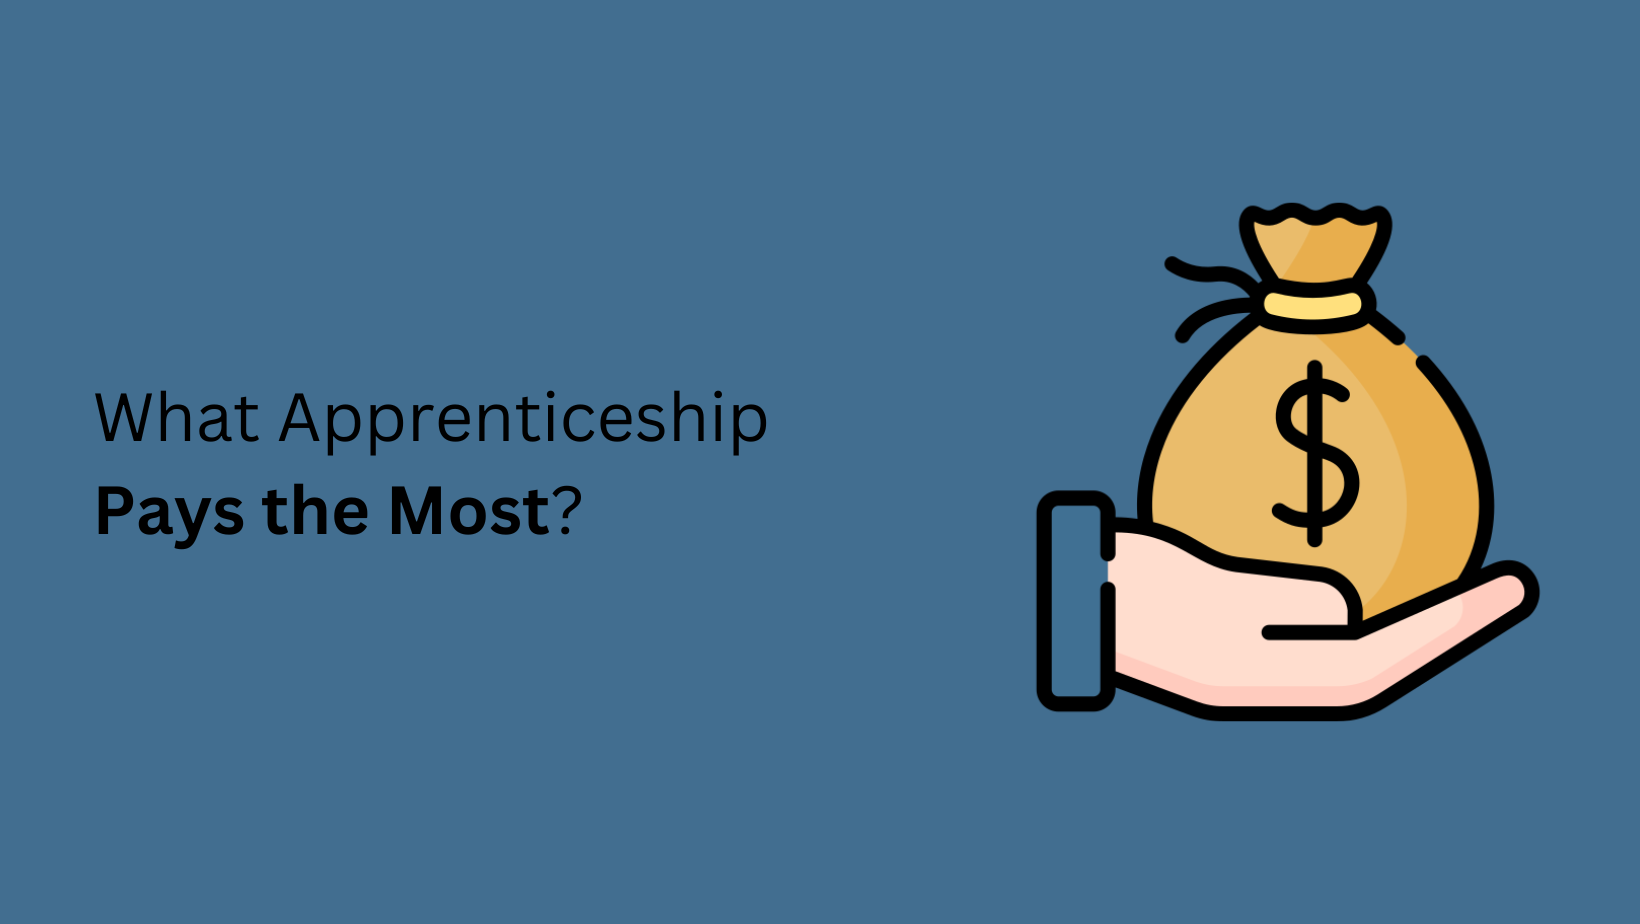 What Apprenticeship Pays the Most